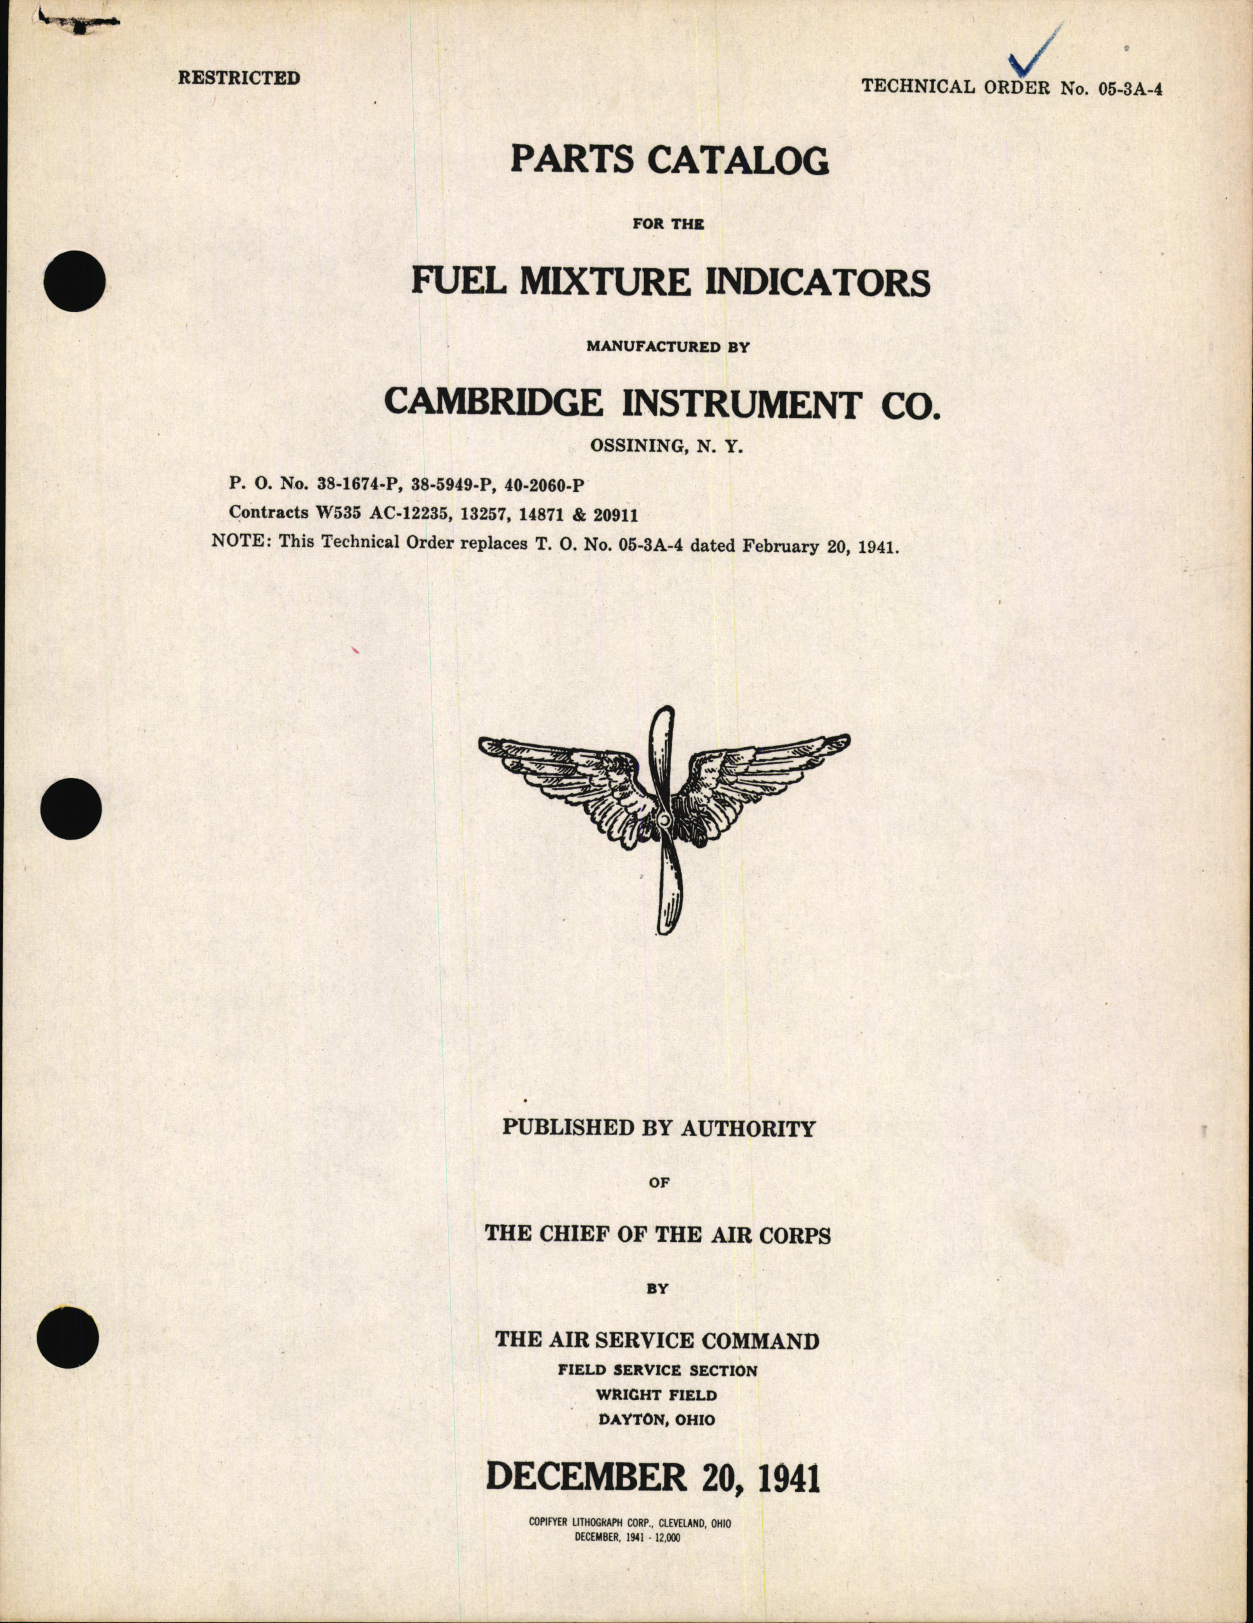 Sample page 1 from AirCorps Library document: Parts Catalog for Fuel Mixture Indicators